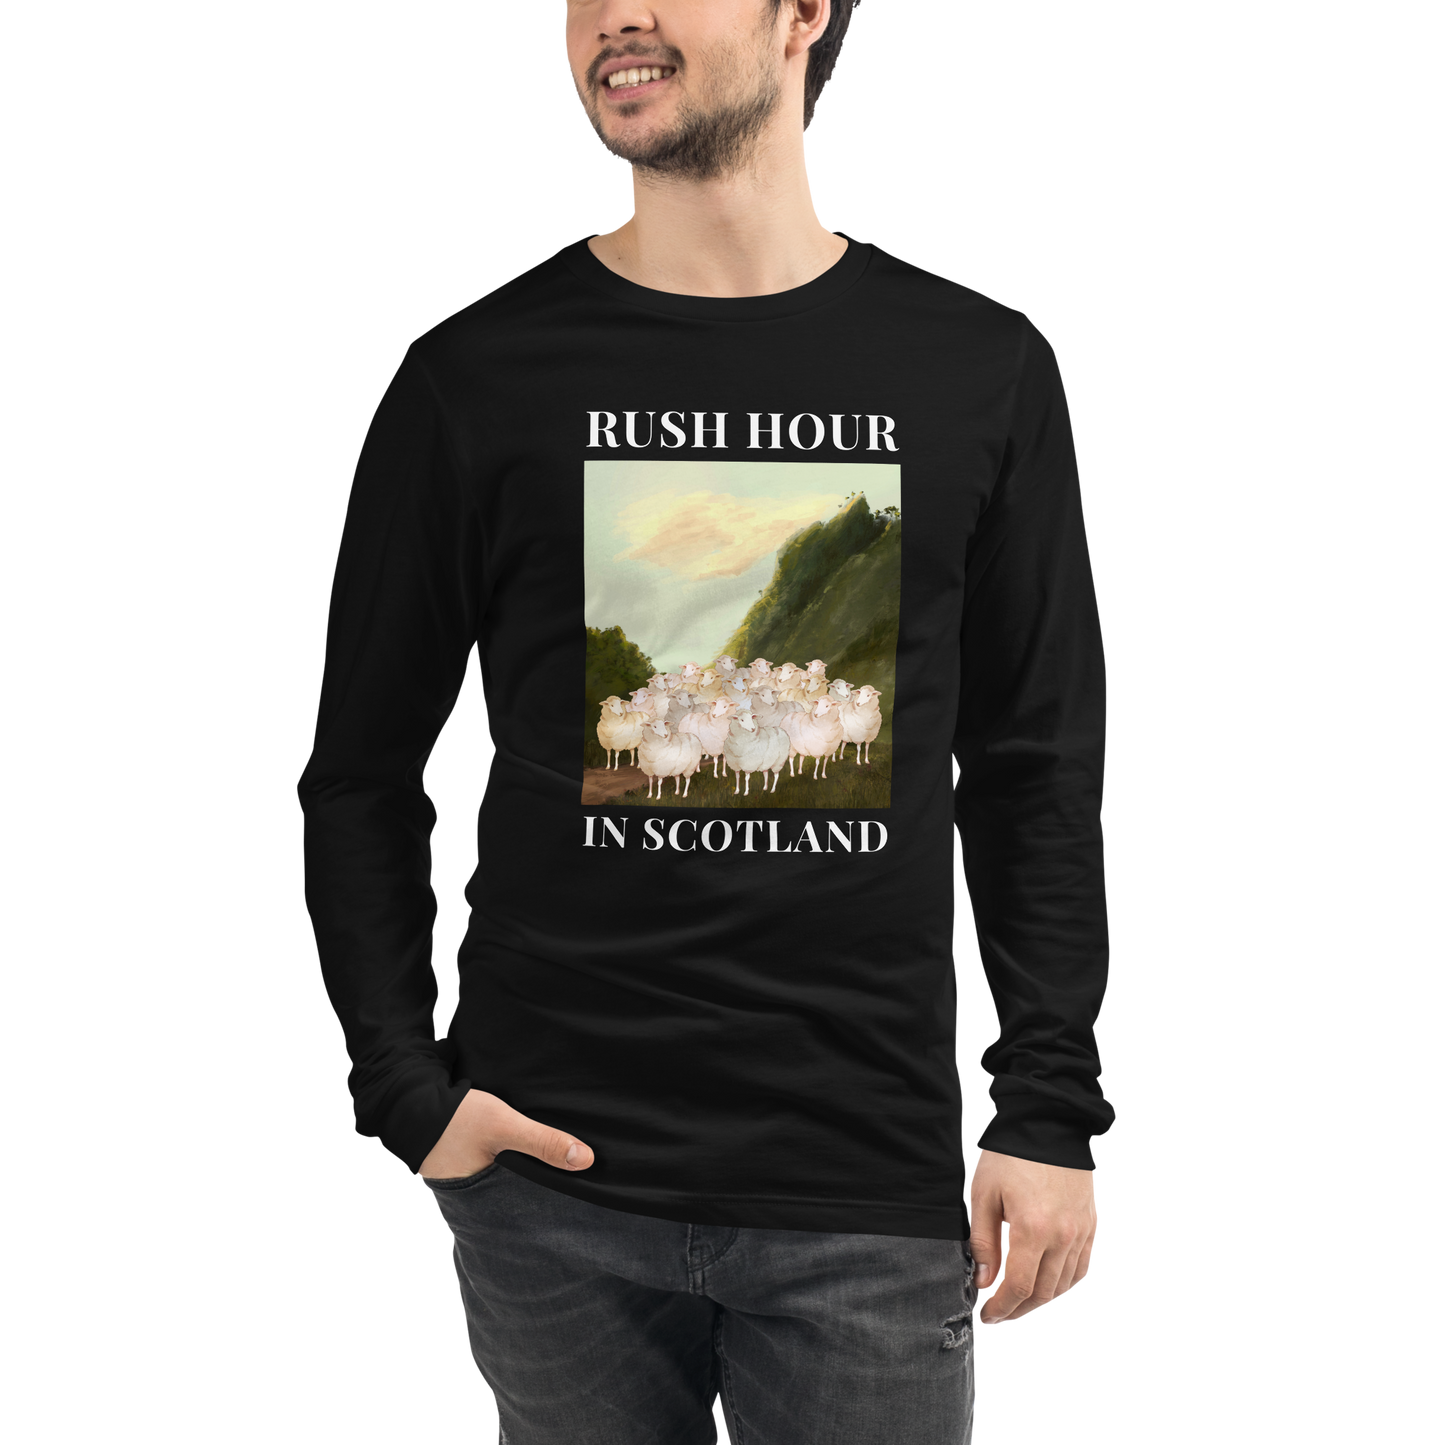 Man wearing a Black Sheep Long Sleeve Tee featuring a comical Rush Hour In Scotland graphic on the chest - Artsy/Funny Sheep Long Sleeve Graphic Tees - Boozy Fox